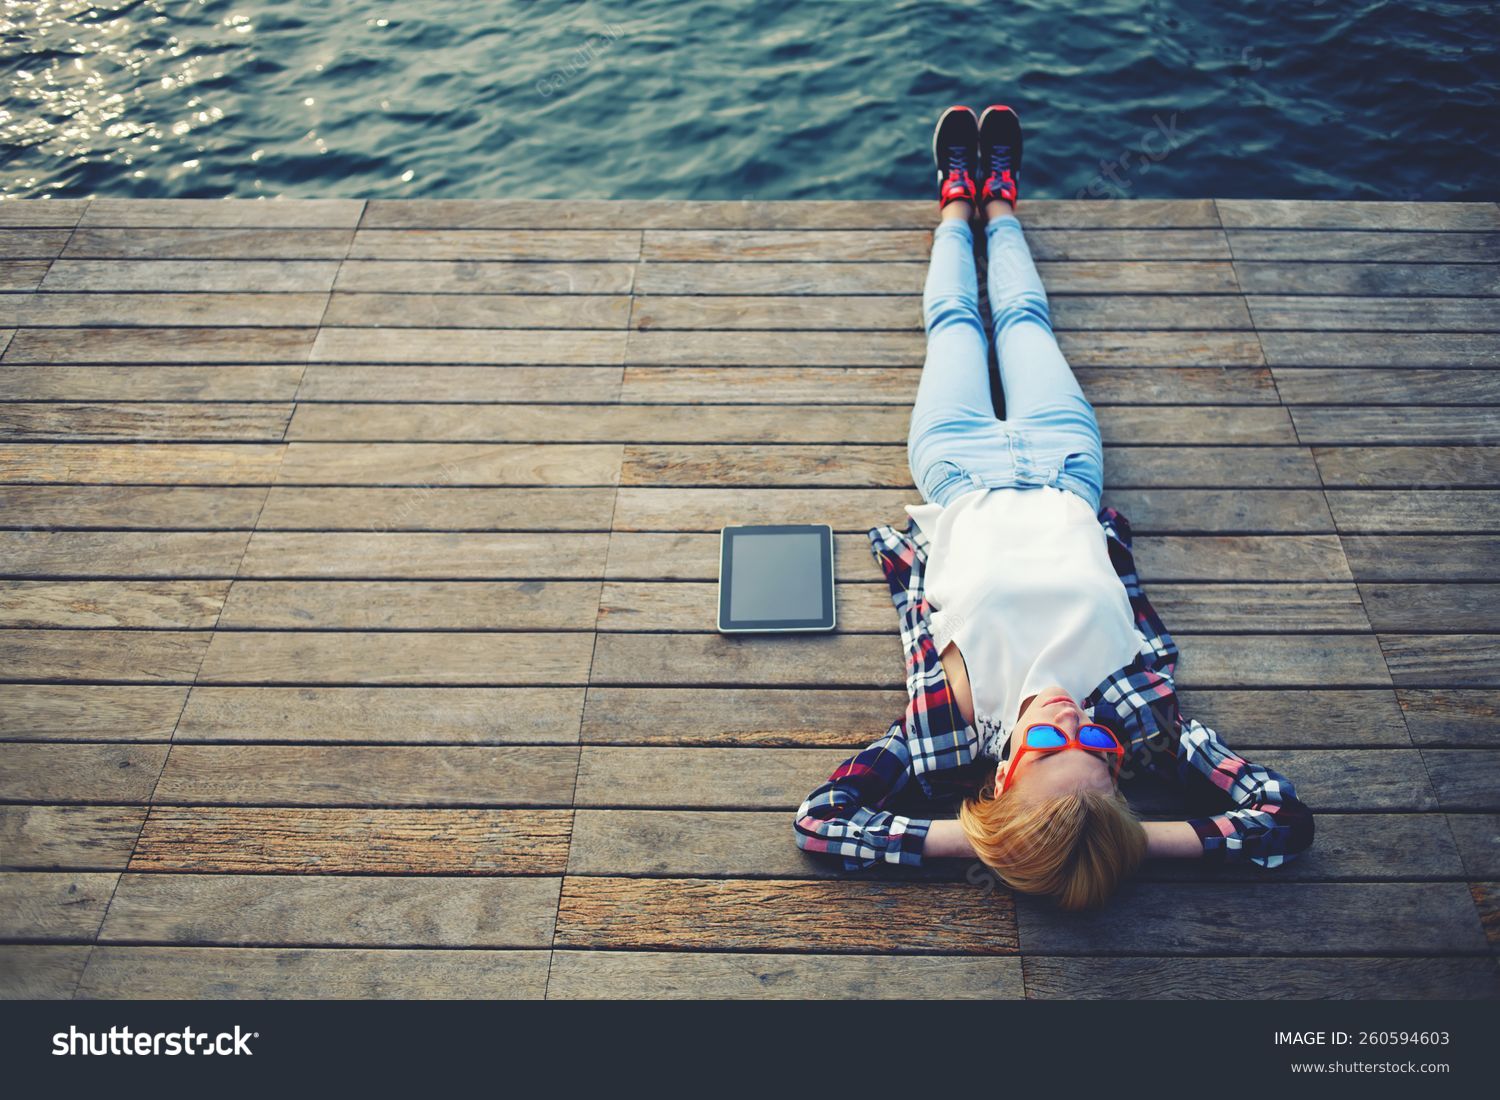 Top view young woman lying on a wooden jetty enjoying the sunshine,tourist girl in bright glasses lying on jetty by river, vintage photo of relaxing young woman in nature with tablet, cross process #260594603